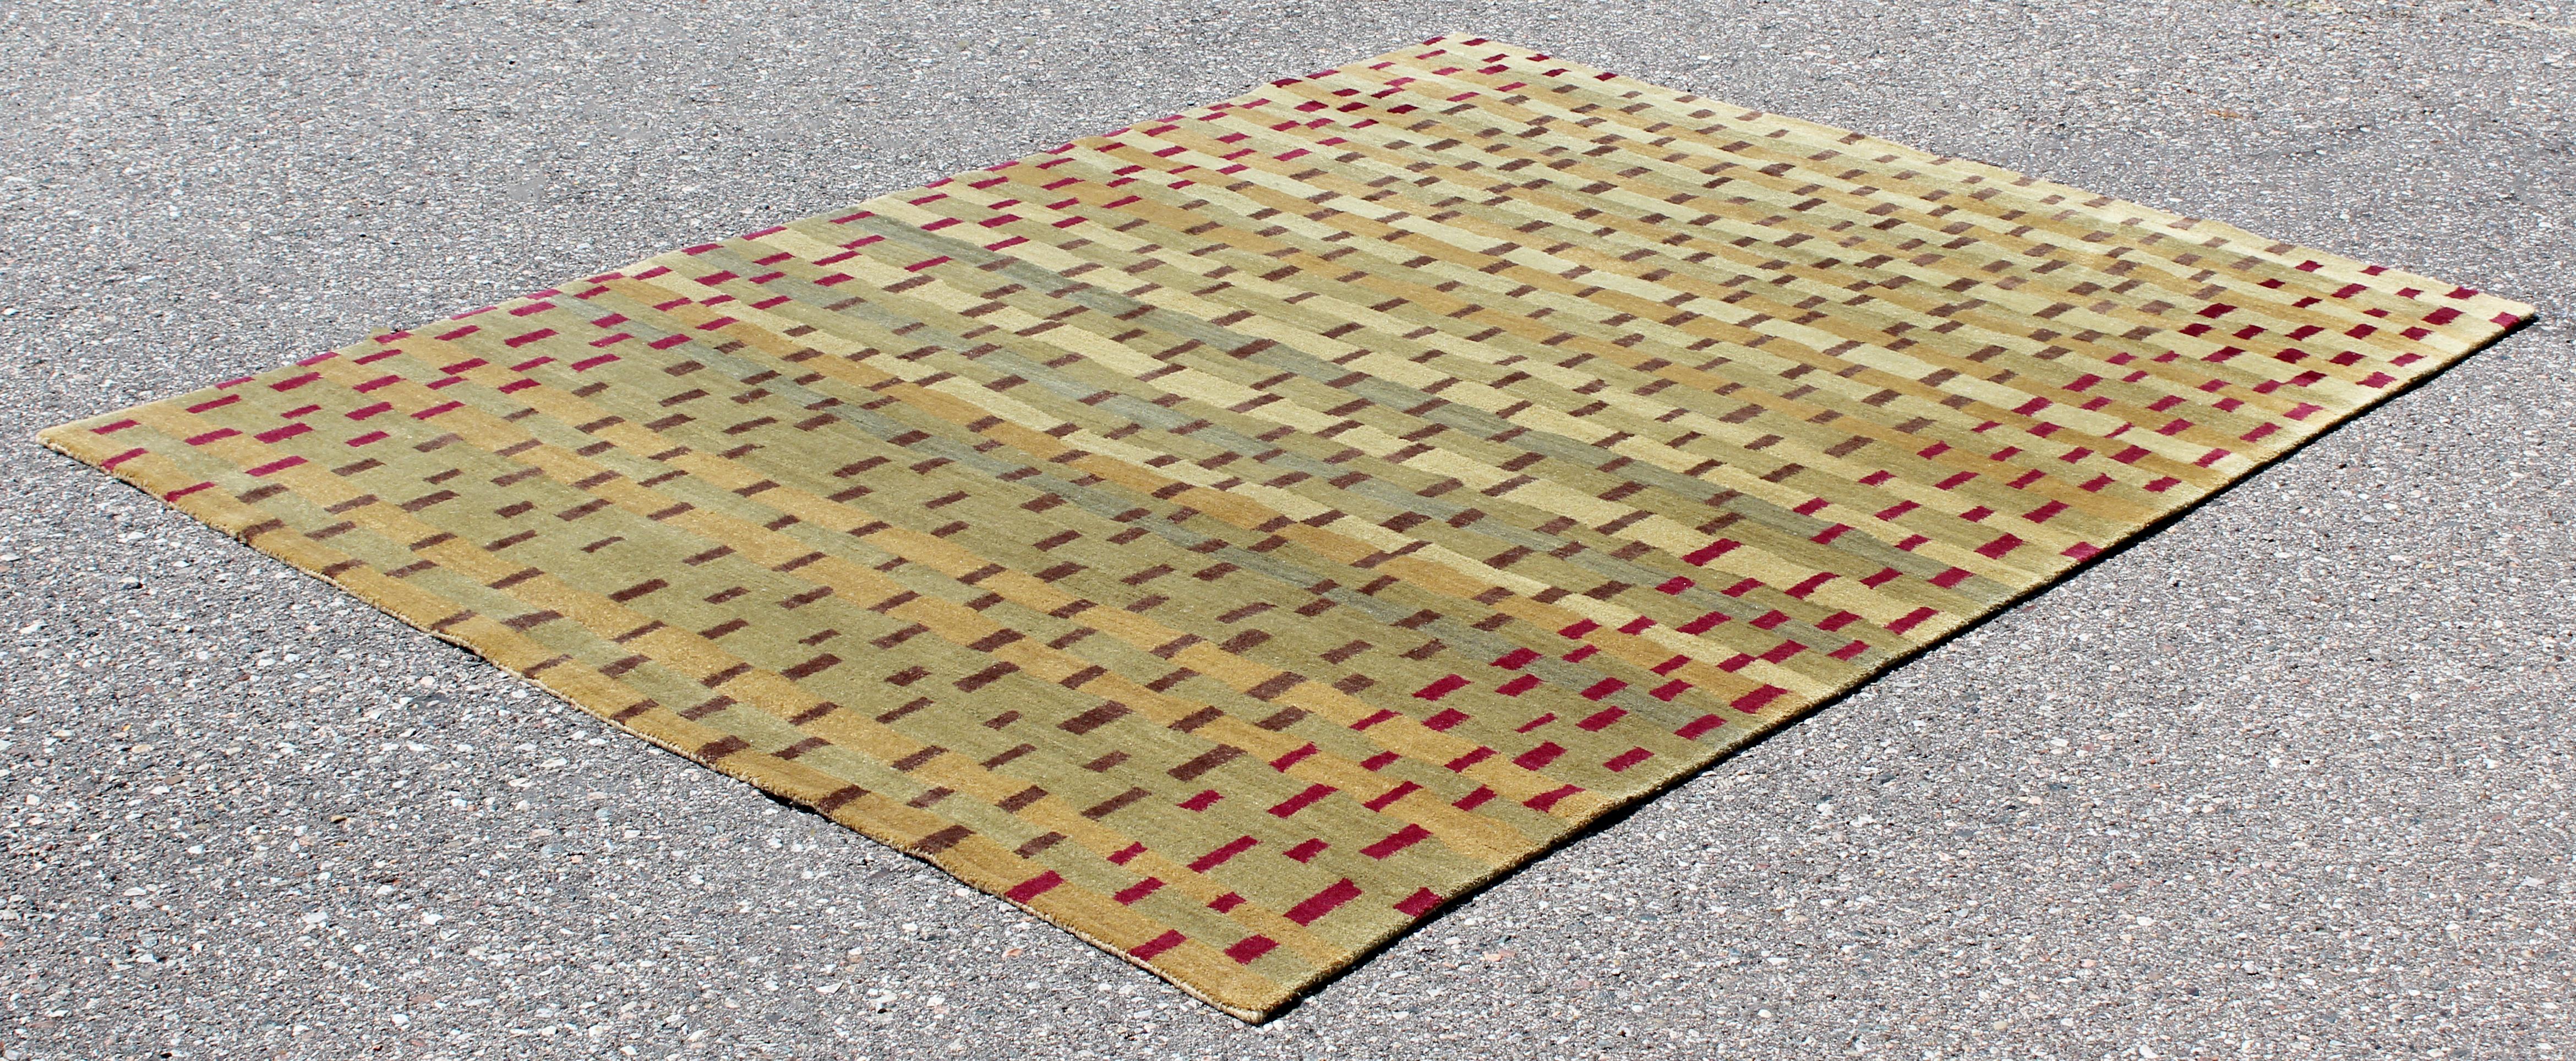 For your consideration is a wonderful, beige and red, rectangular area rug or carpet custom made by McQueens, wool & silk blend. In excellent condition. The dimensions are 85